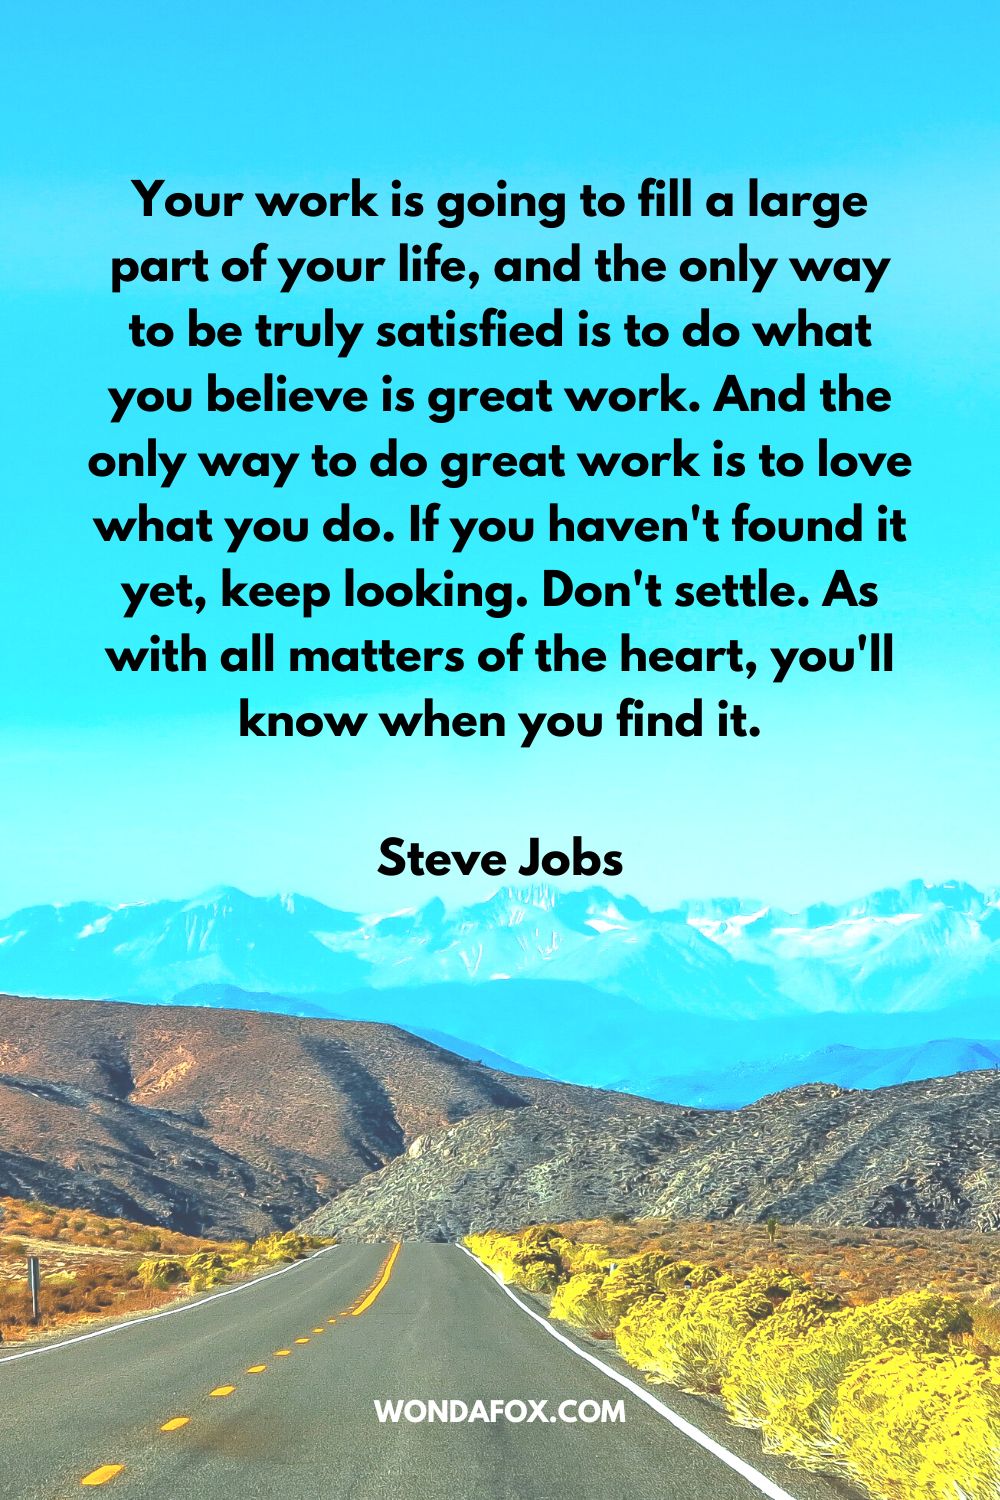 Your work is going to fill a large part of your life, and the only way to be truly satisfied is to do what you believe is great work. And the only way to do great work is to love what you do. If you haven't found it yet, keep looking. Don't settle. As with all matters of the heart, you'll know when you find it. Steve Jobs